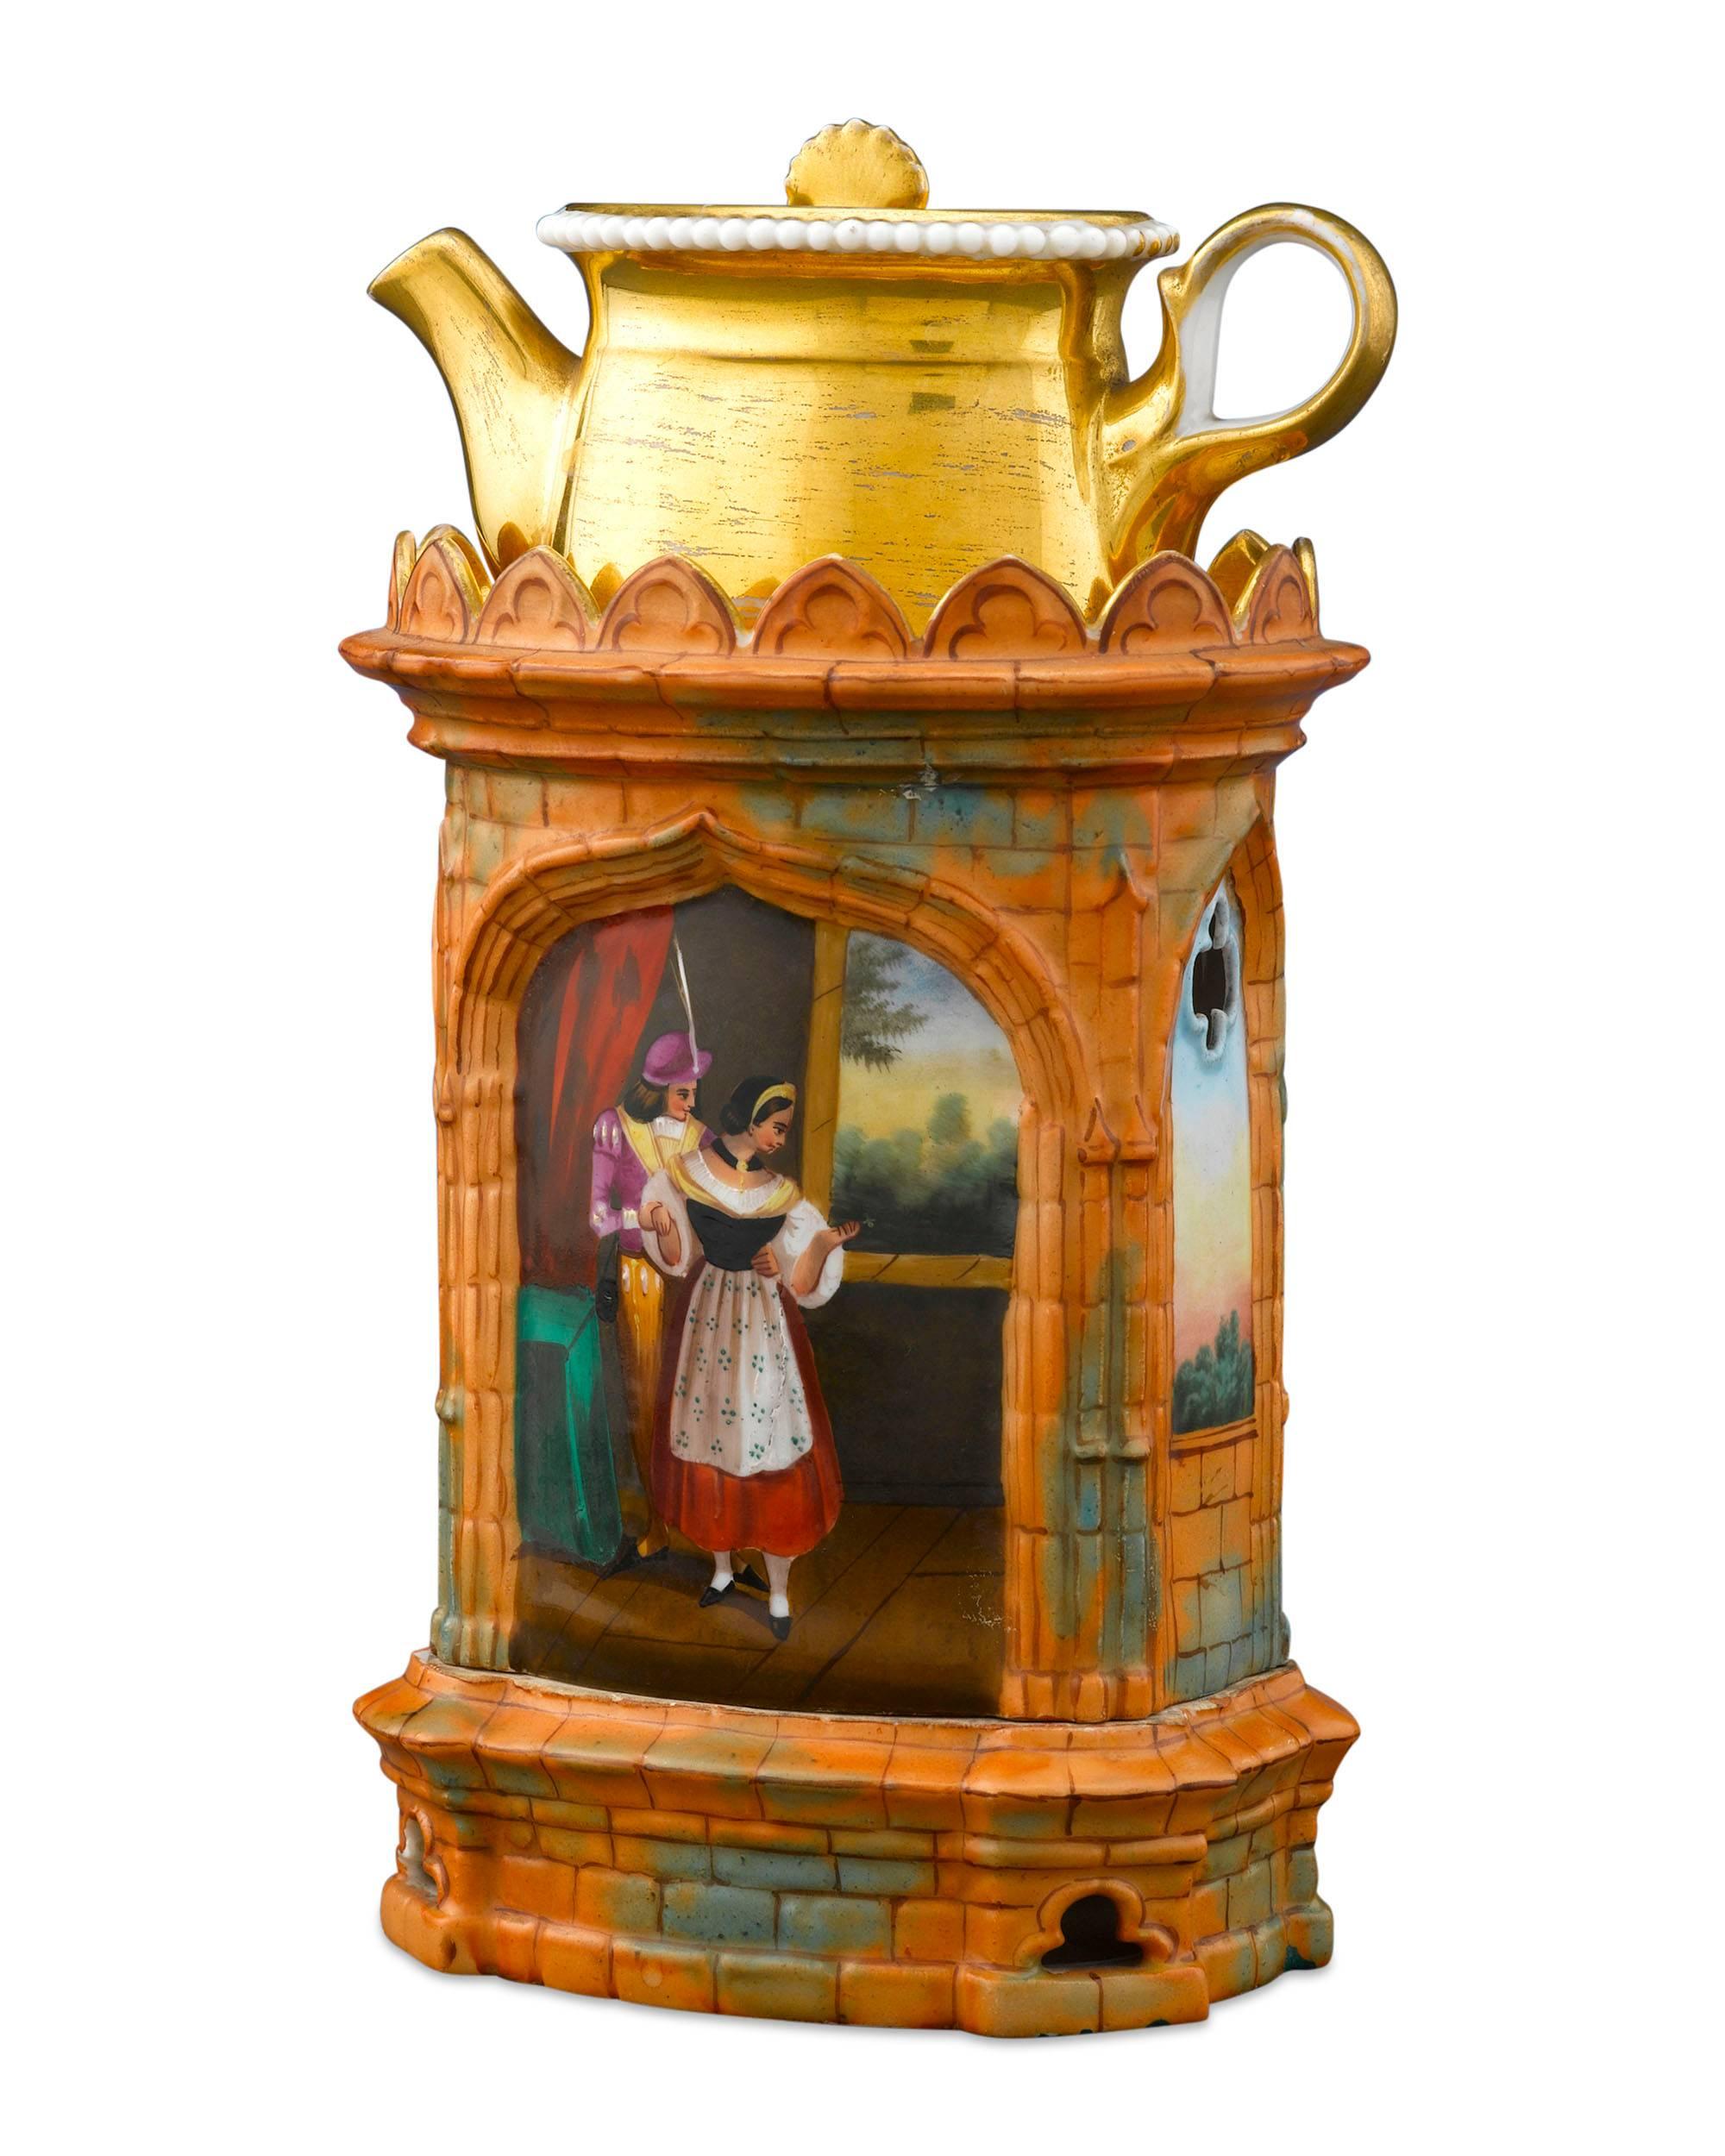 This excellent porcelain veilleuse is crafted in the form of an orange brick Gothic church, with hand-painted scenes, and is comprised of a demitasse teapot on a warming stand, inside which a small candle or oil is lit inside, keeping the tea in the